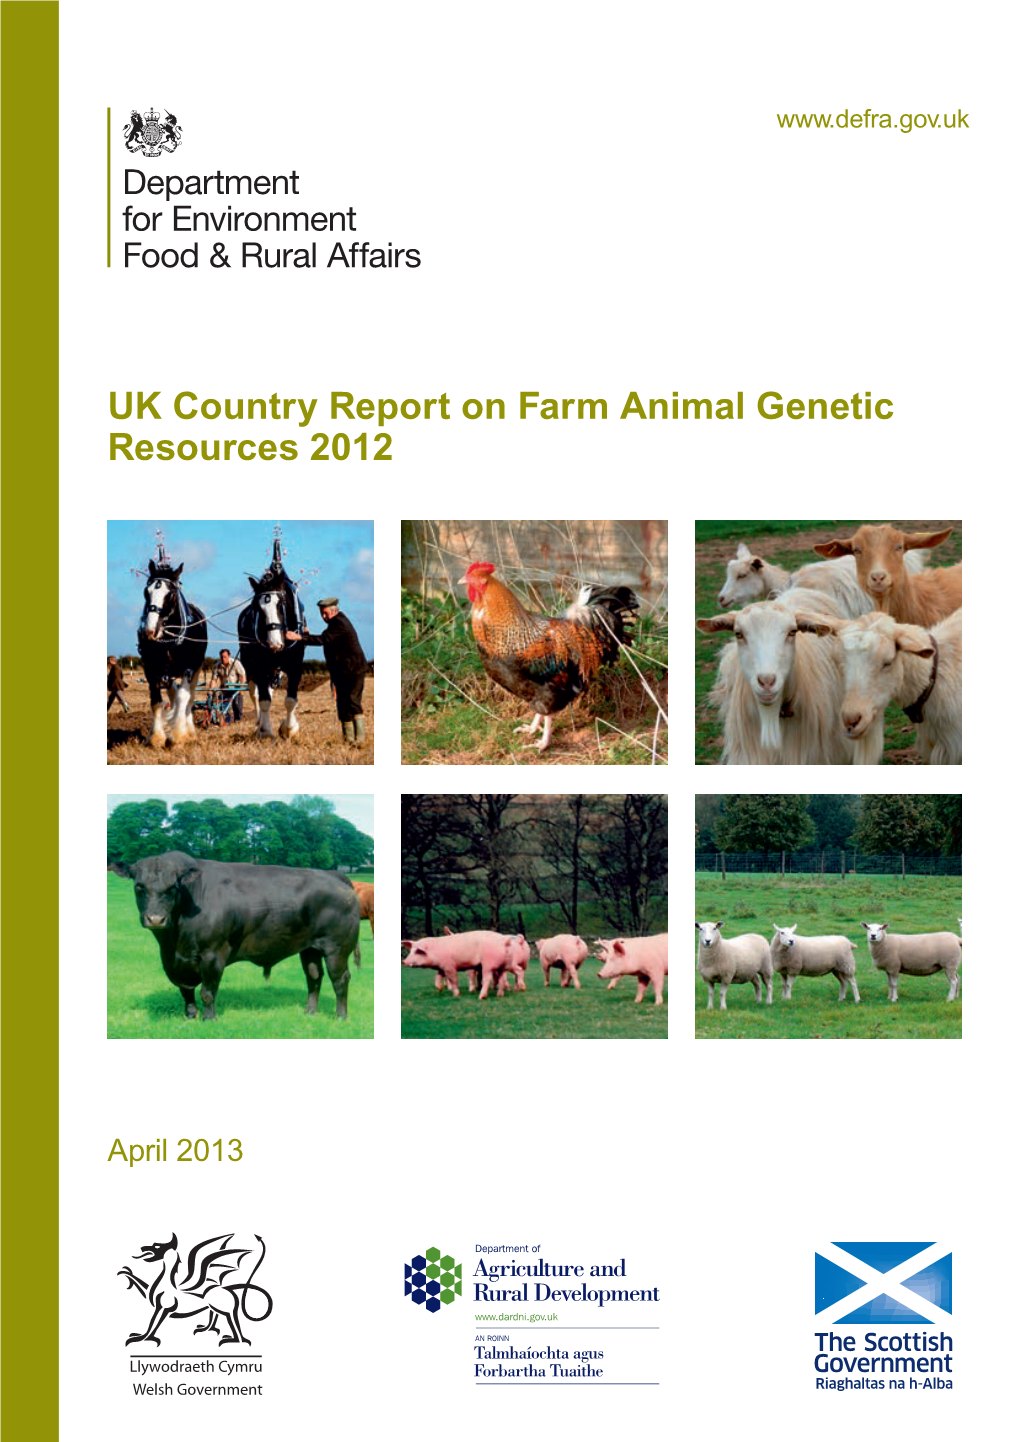 UK Country Report on Farm Animal Genetic Resources 2012